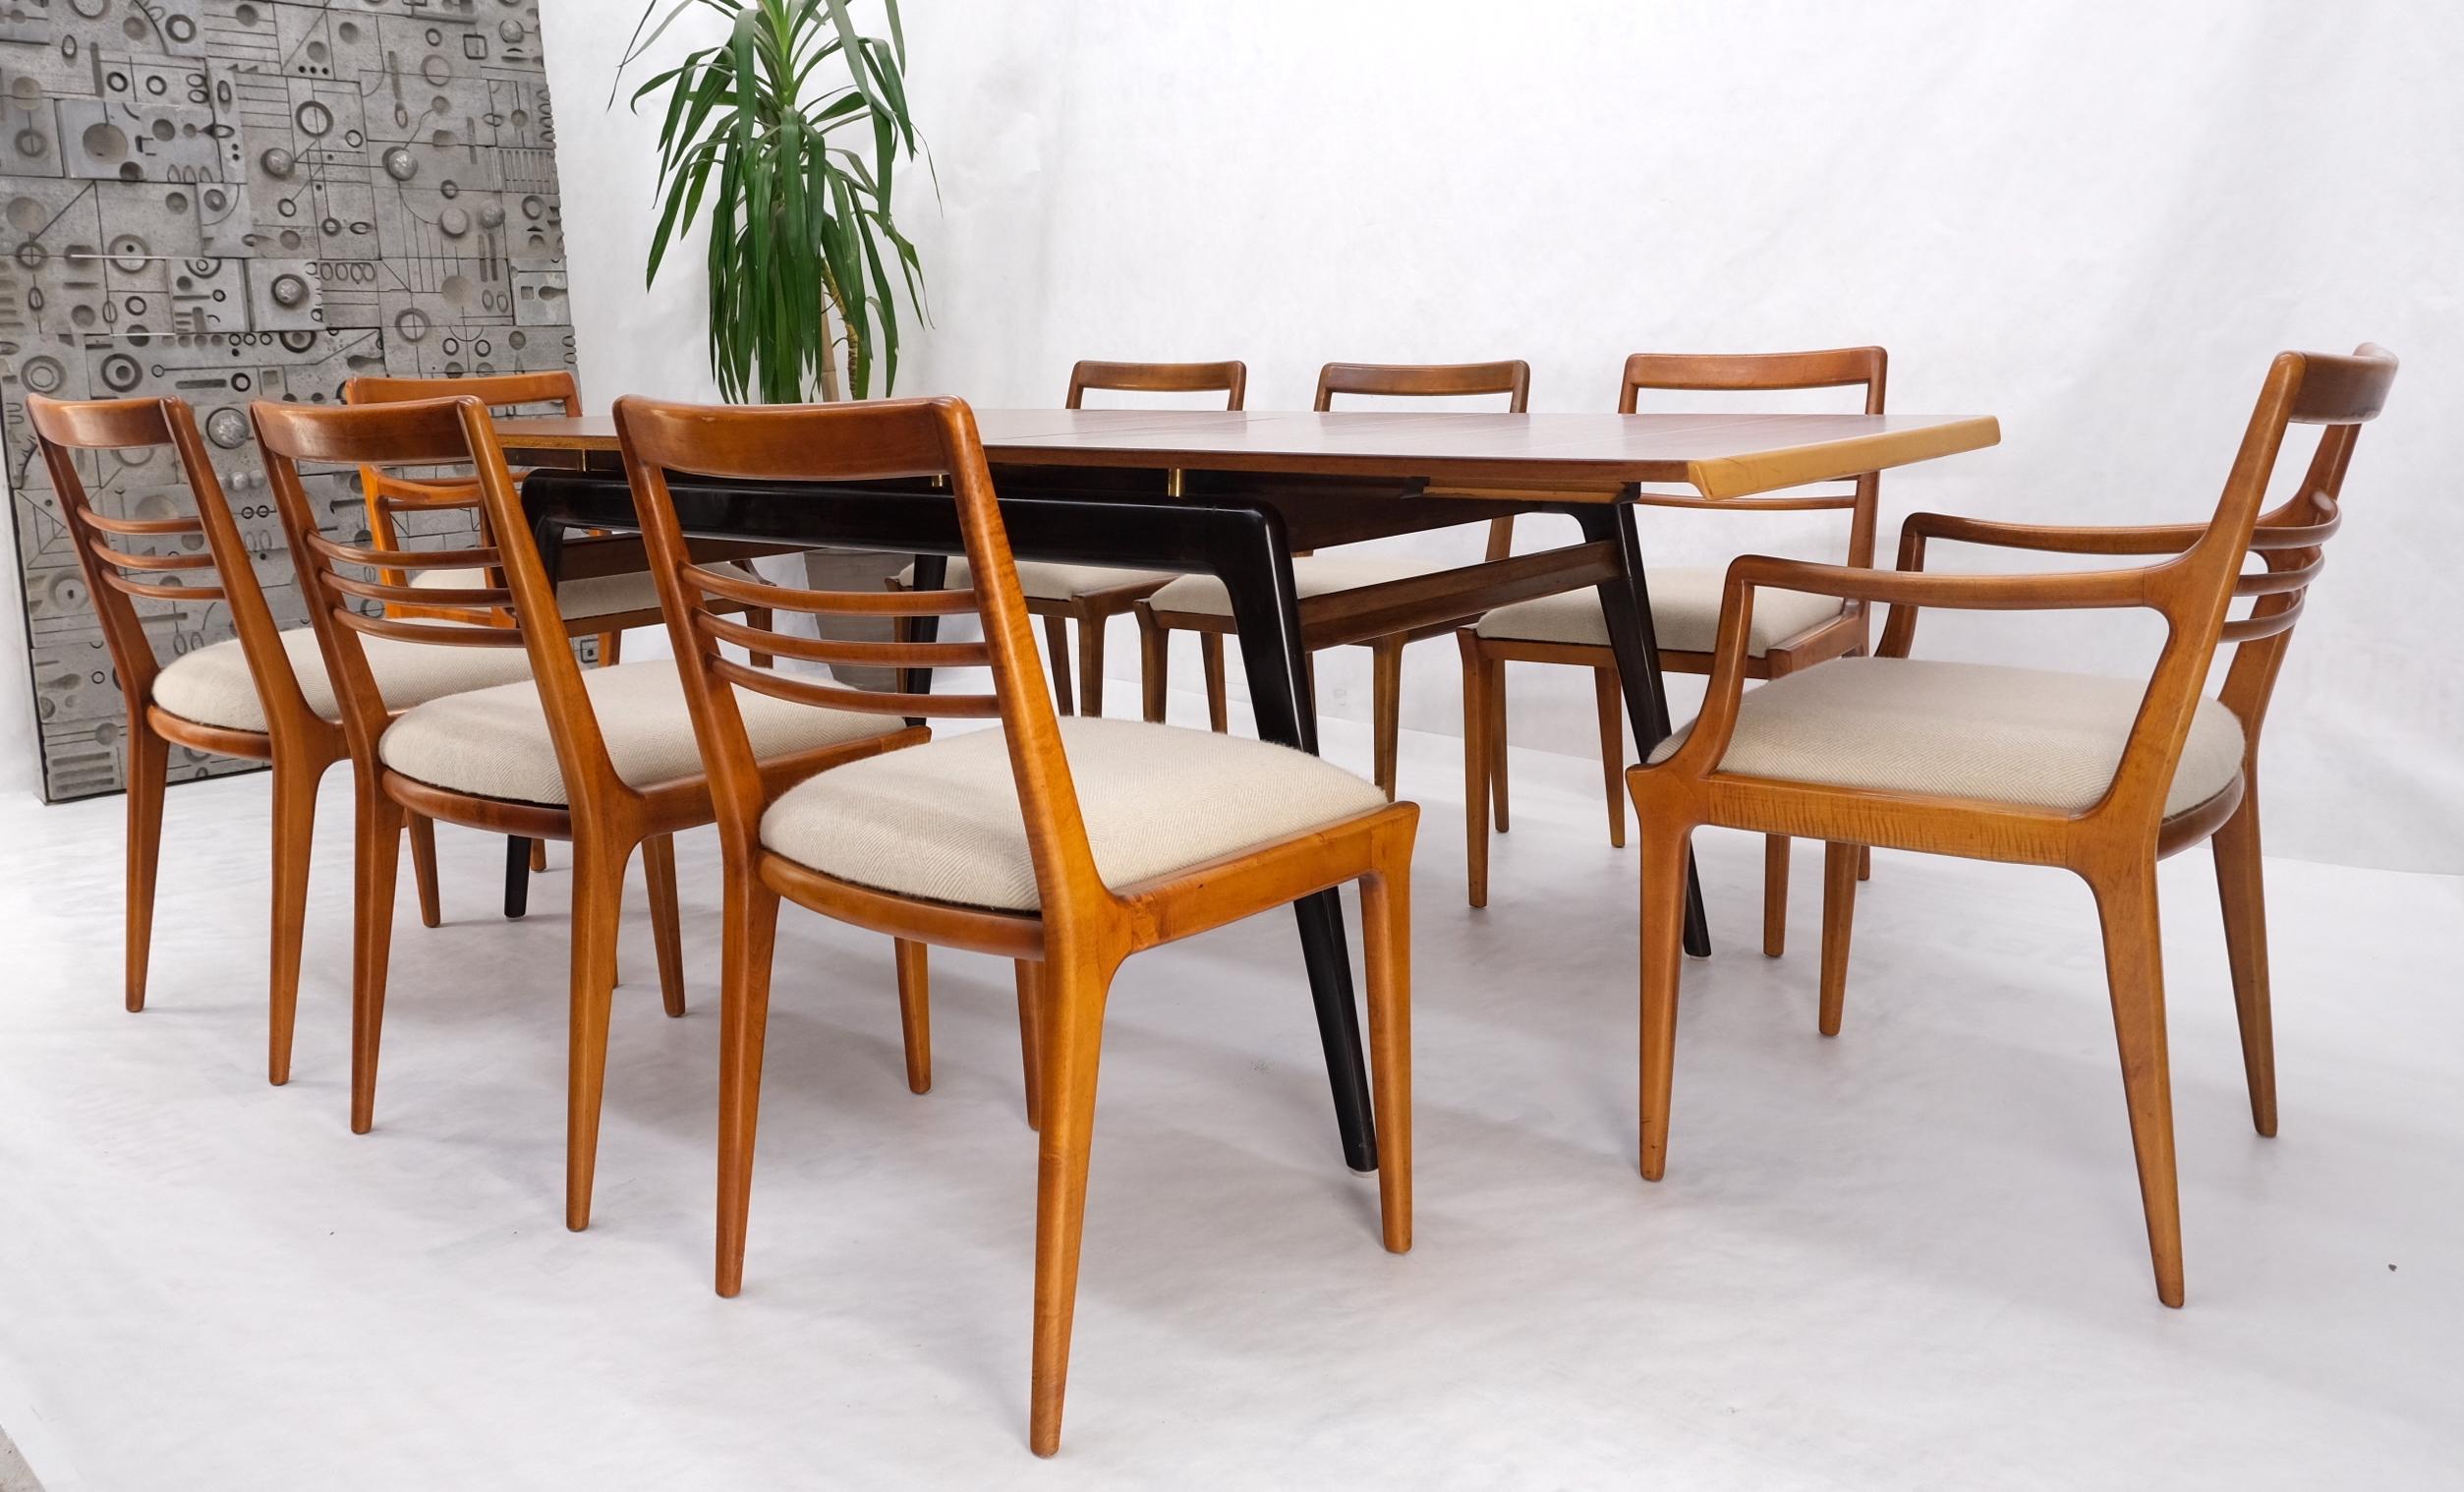 Italian Mid-Century Modern Dining Table 8 Chairs Set New Linen Upholstery Seats For Sale 10